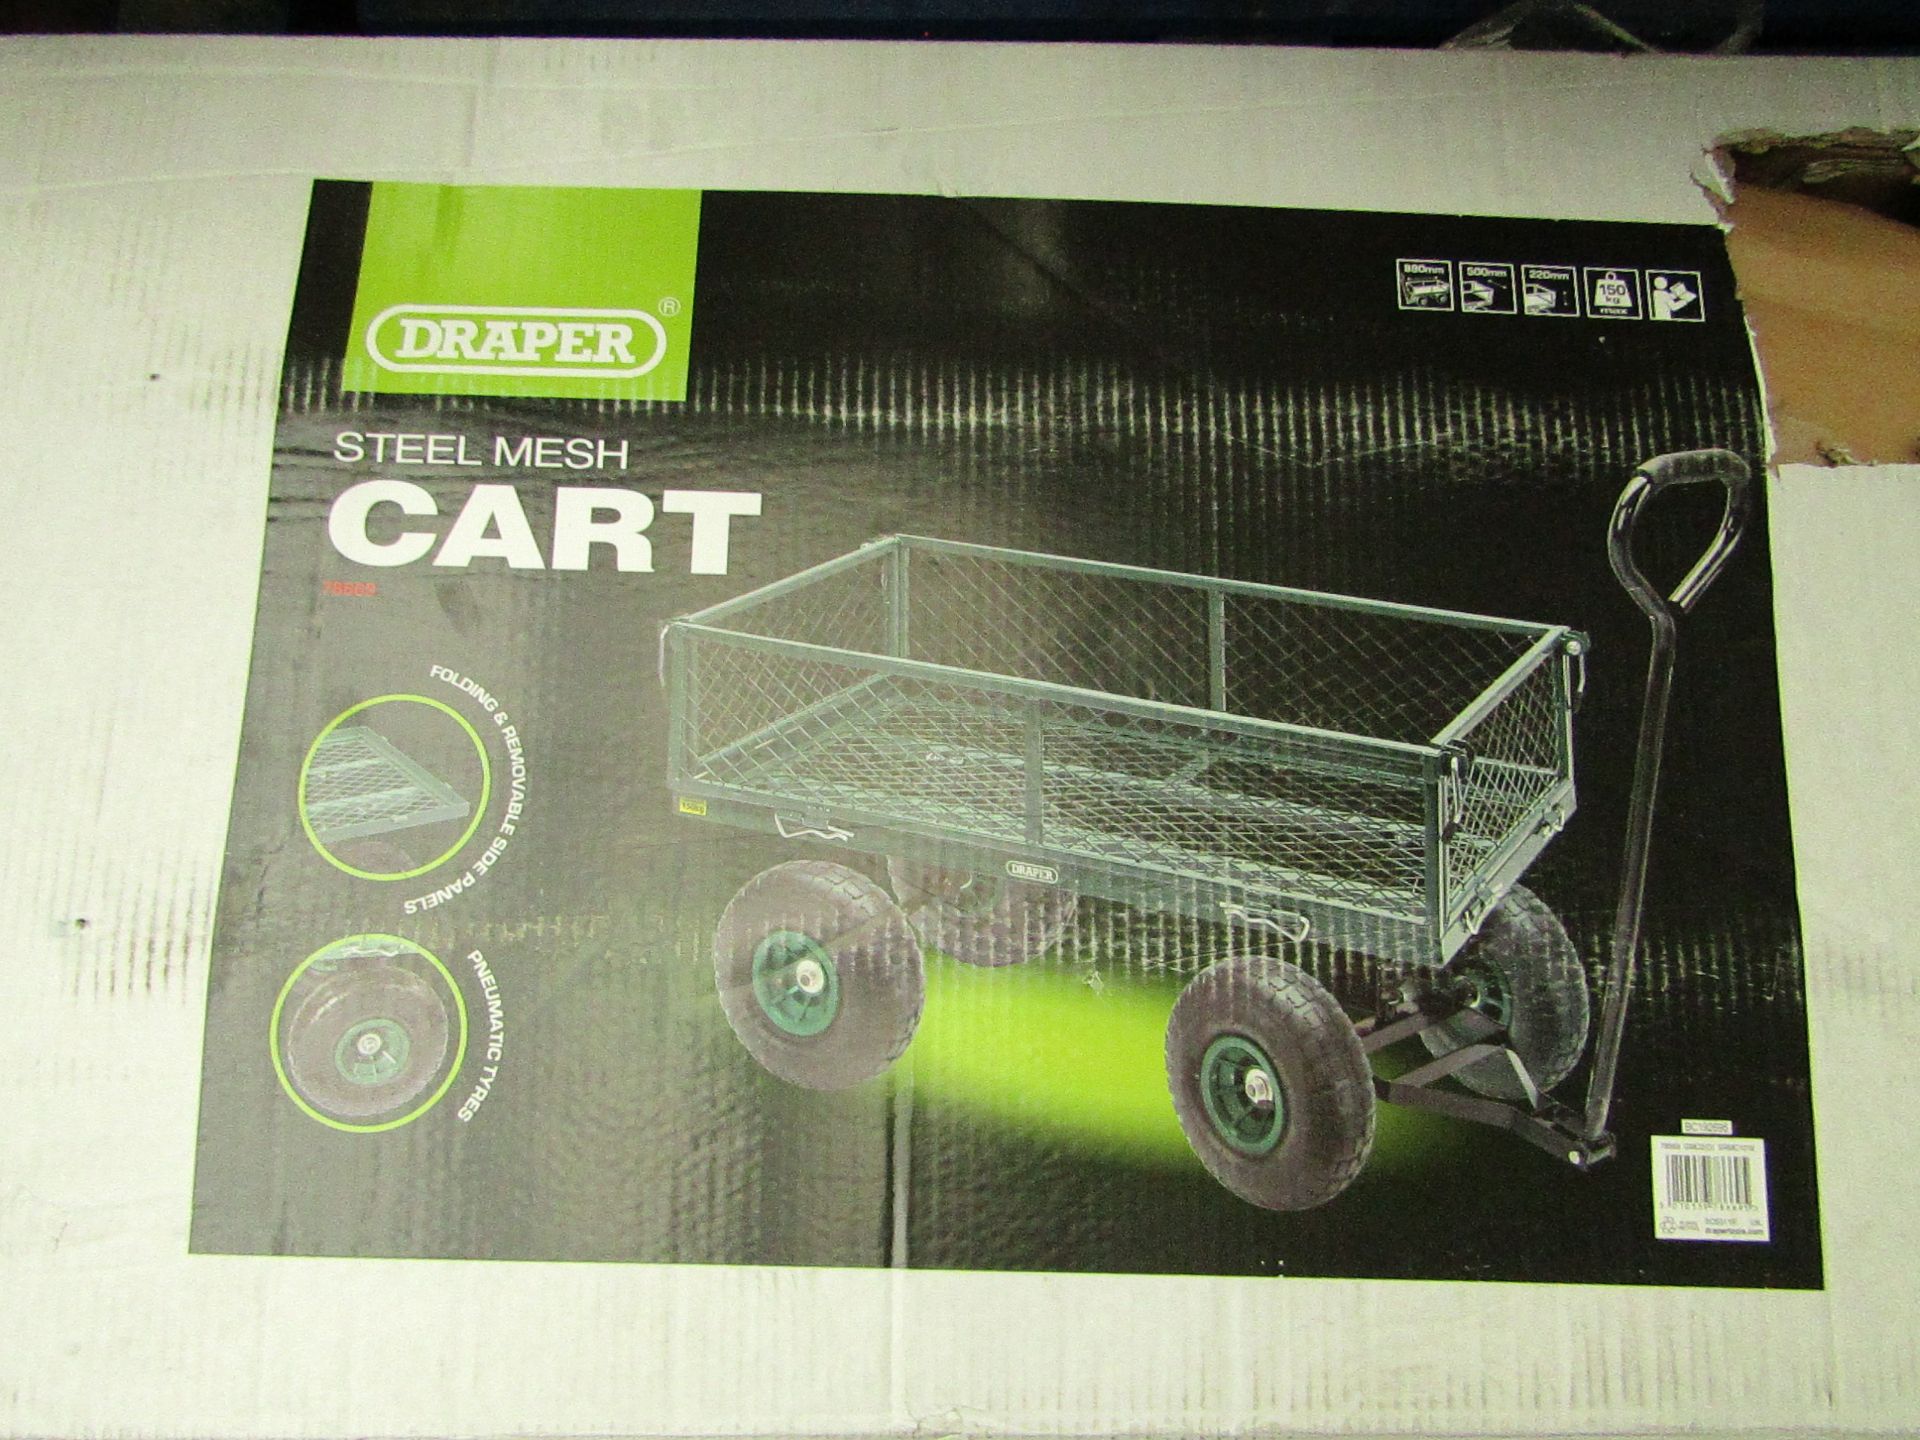 Draper steel mesh cart, size 890mm x 500mm x 220mm, unchecked and boxed.